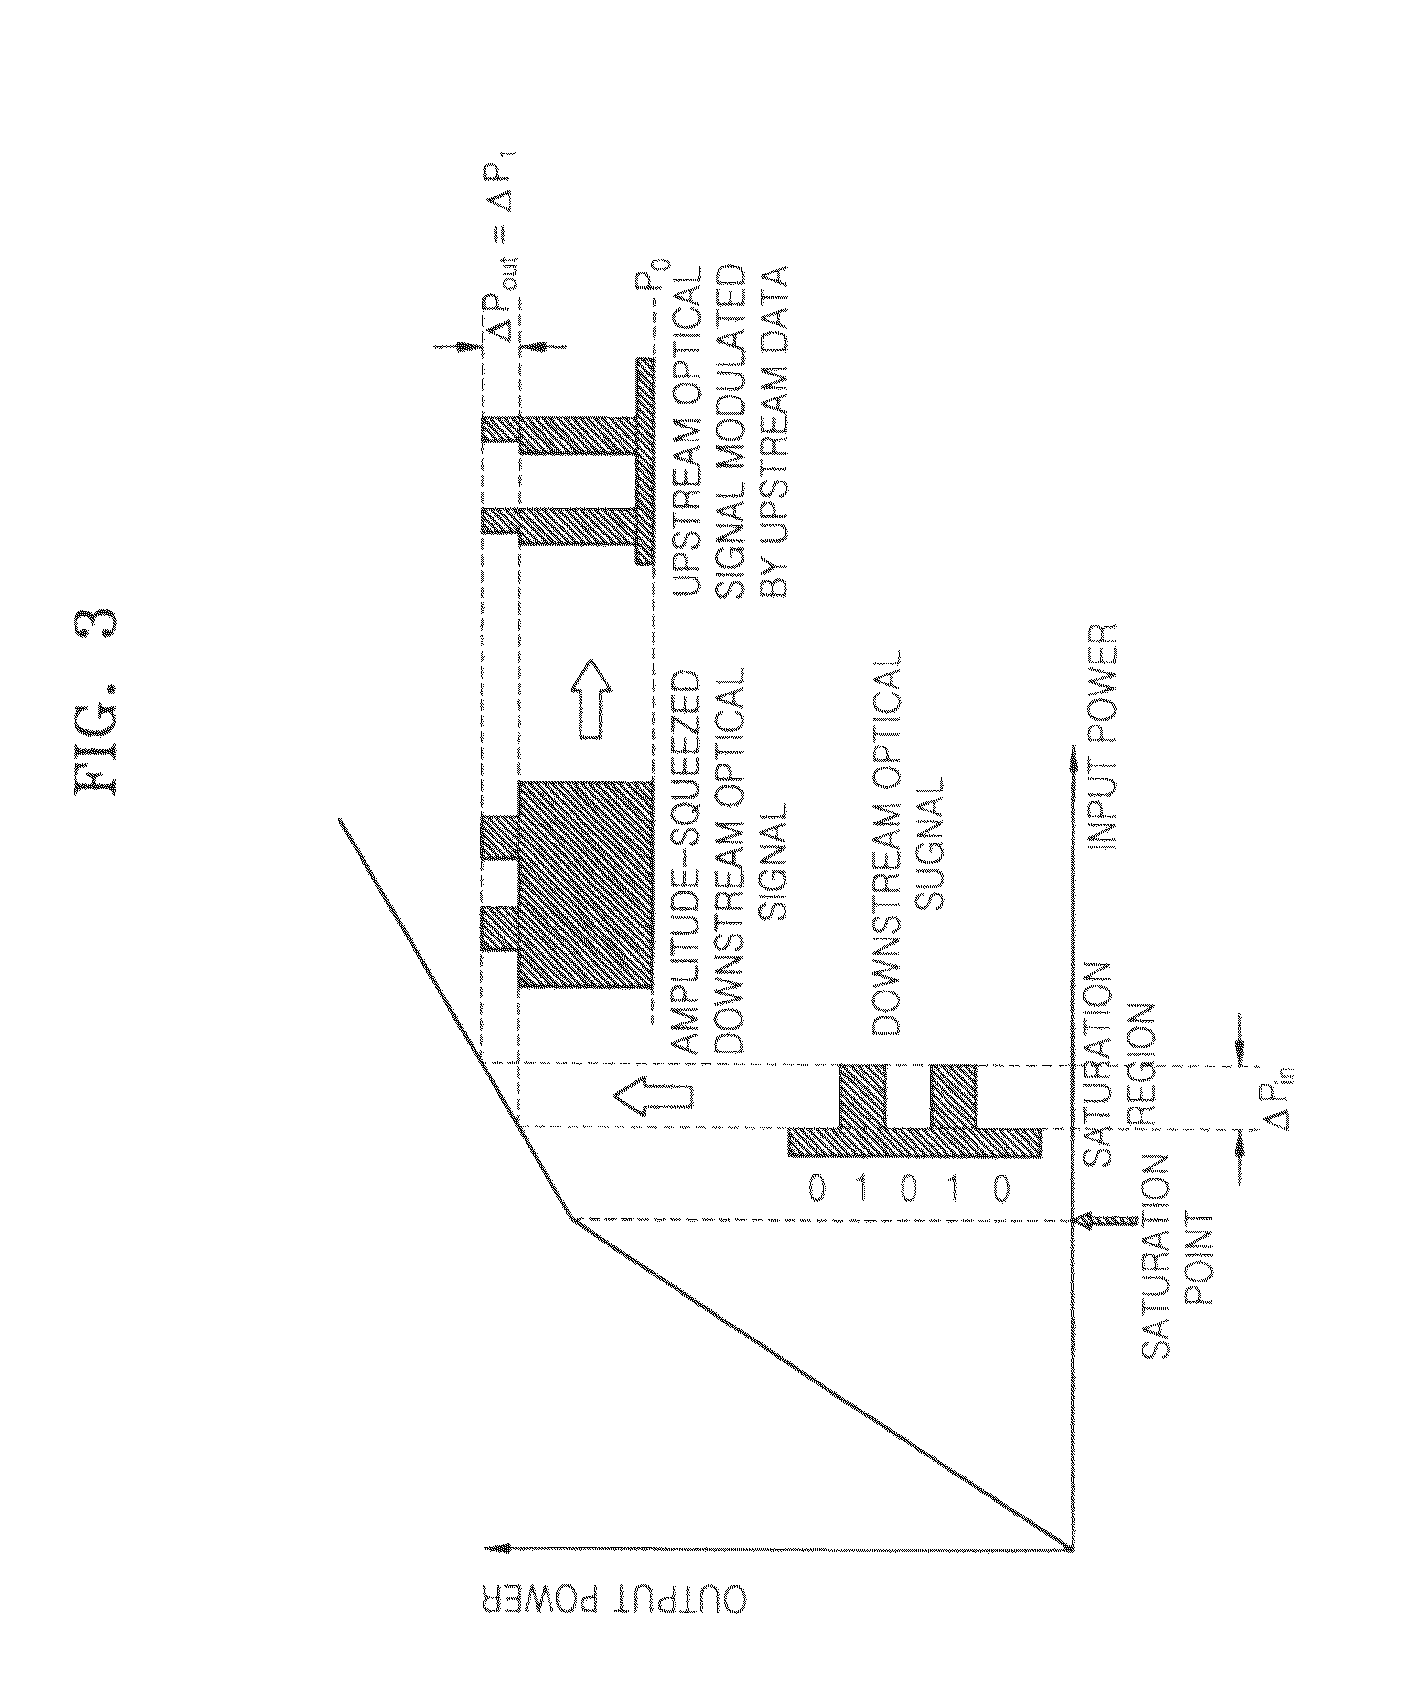 Apparatus and method for OLT and ONU for wavelength agnostic wavelength-division multiplexed passive optical networks